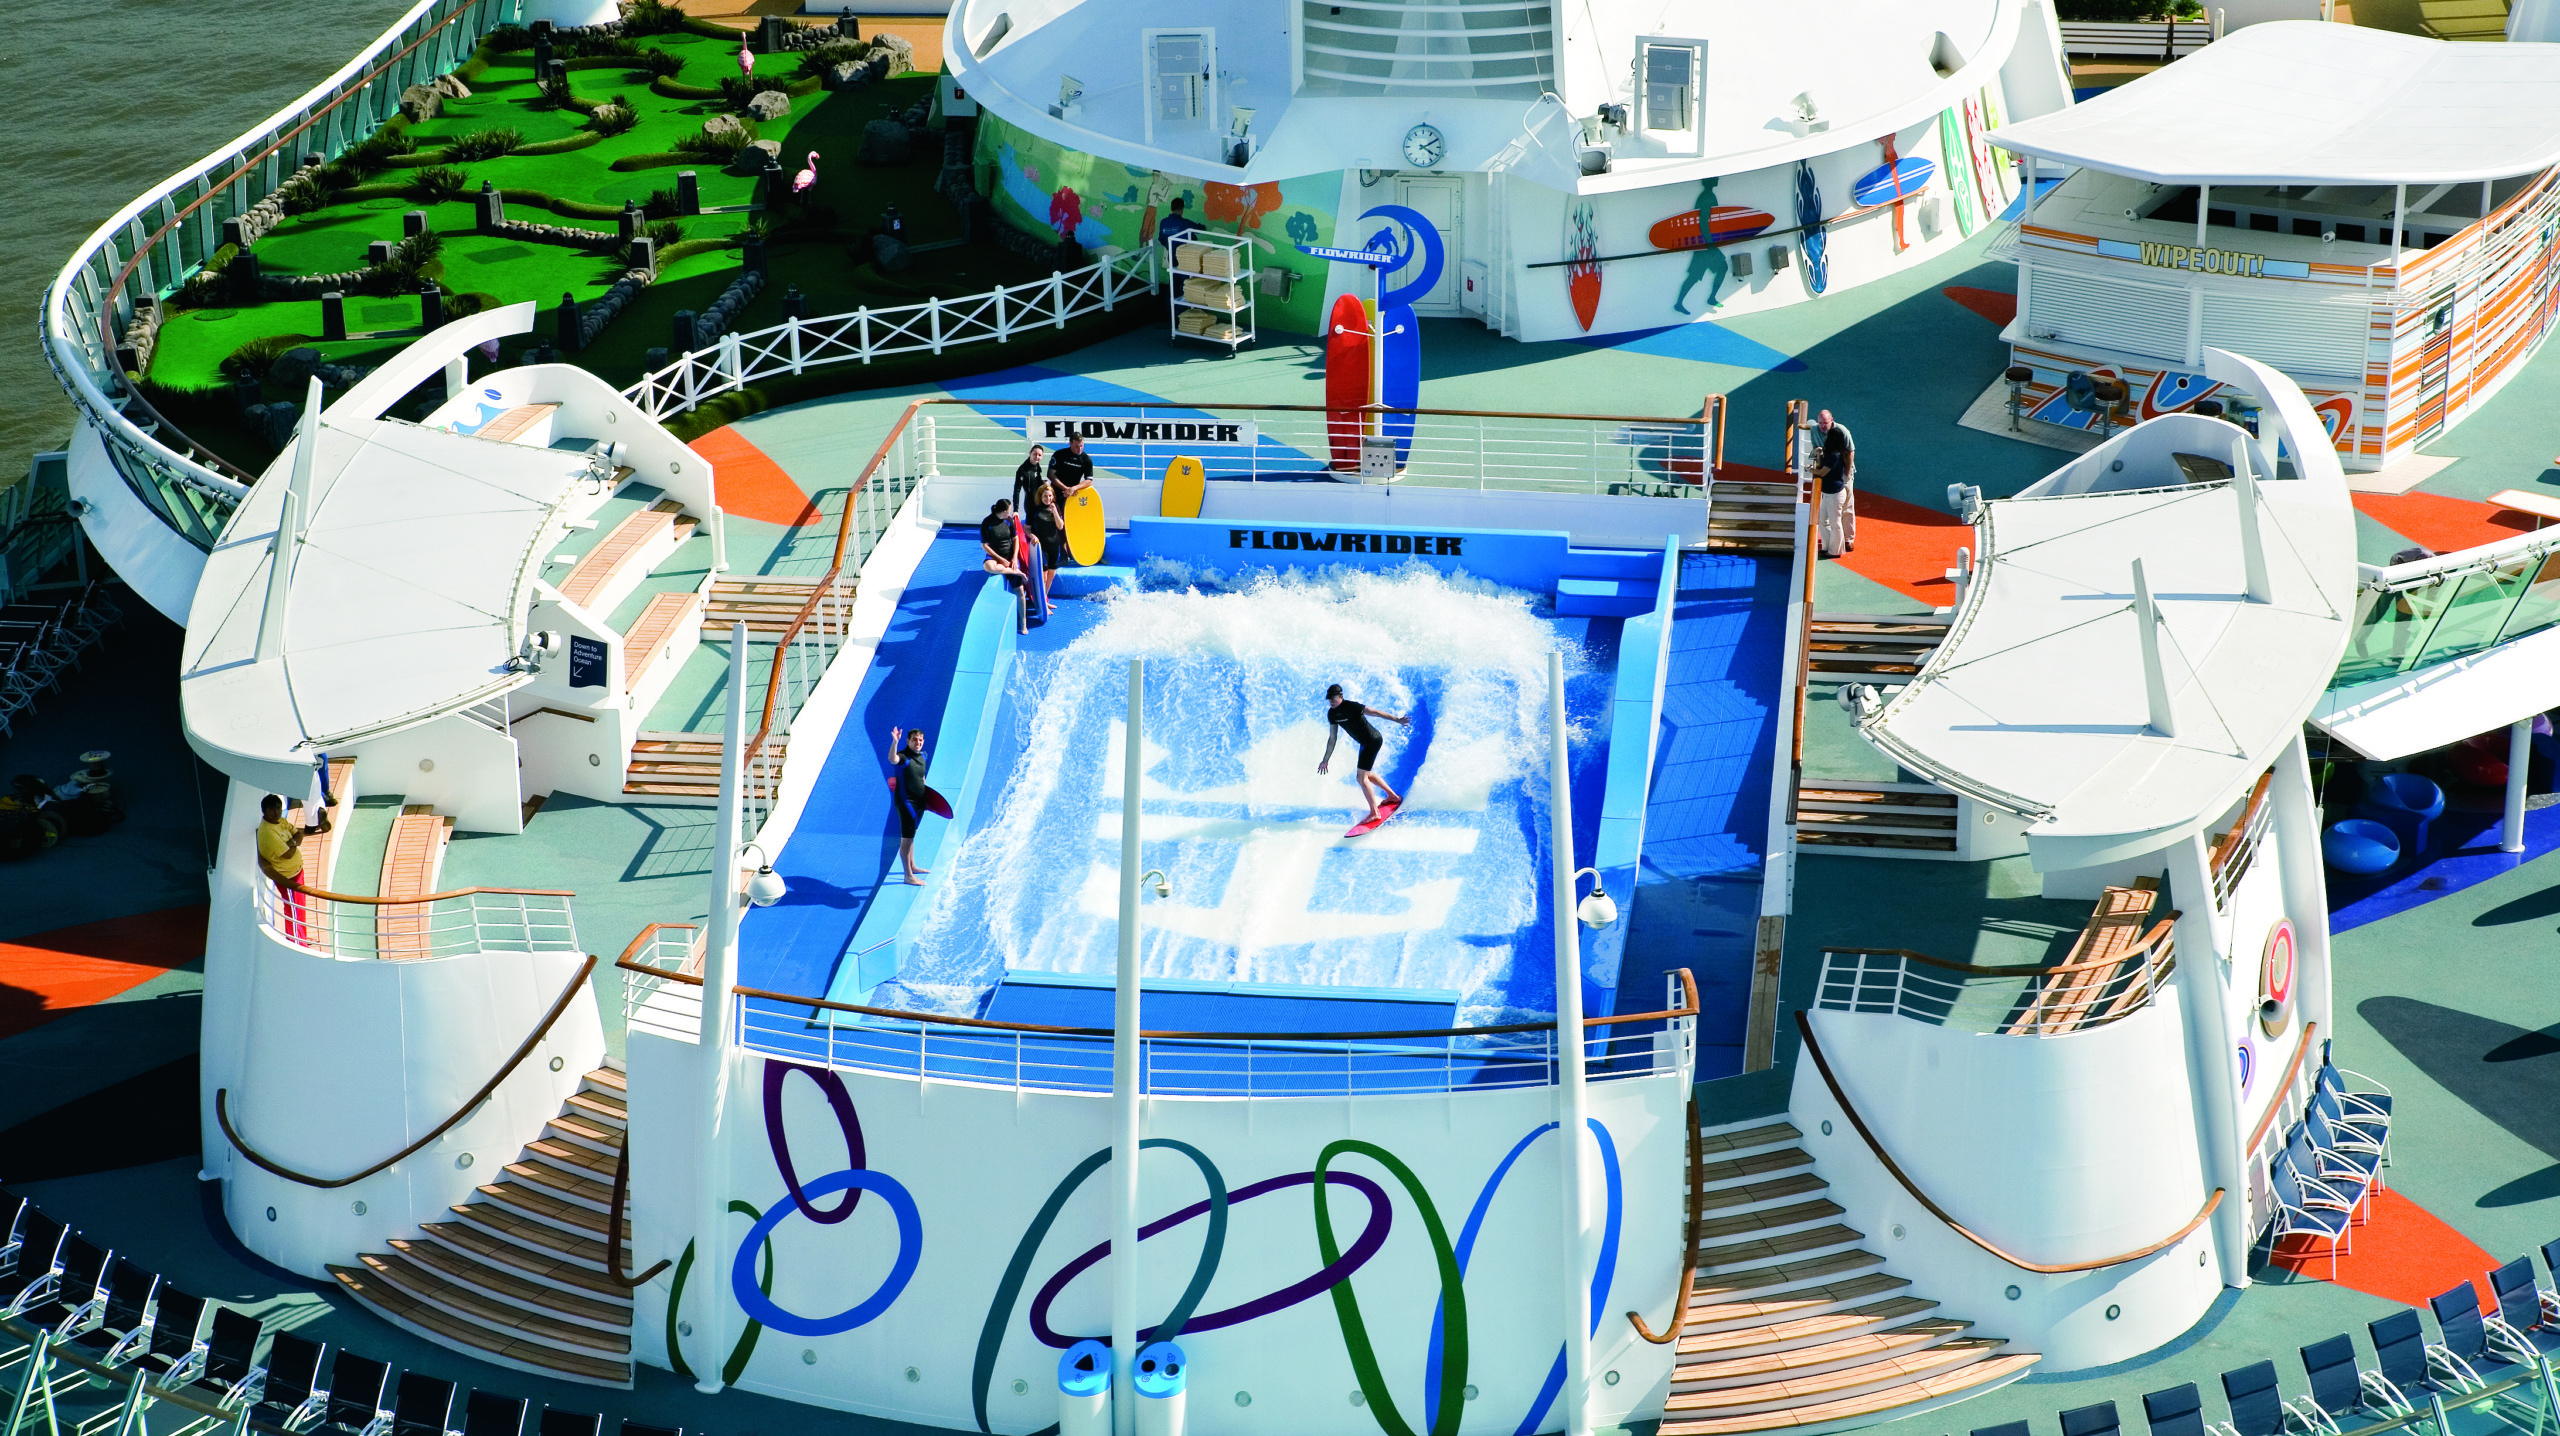 FlowRider Double, Royal Caribbean Cruise Line, Freedom of the Seas